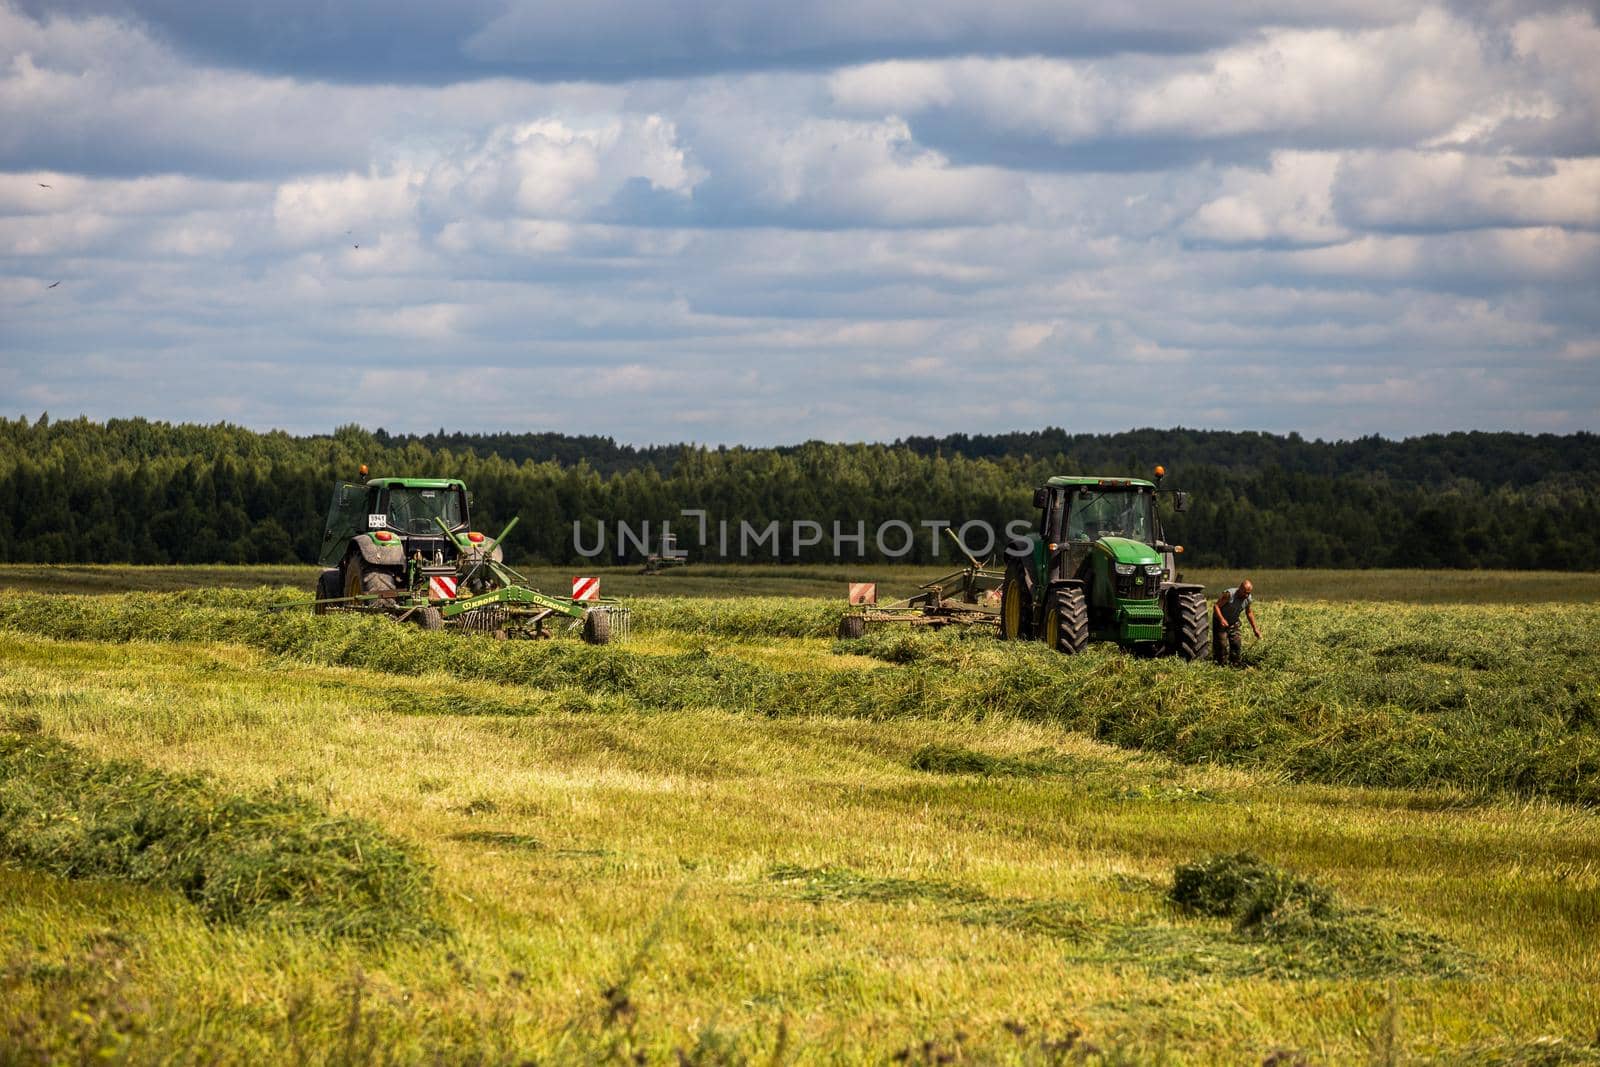 two green haymaking John Deere tractors with Krone plow on summer field before storm - telephoto shot with selective focus by z1b